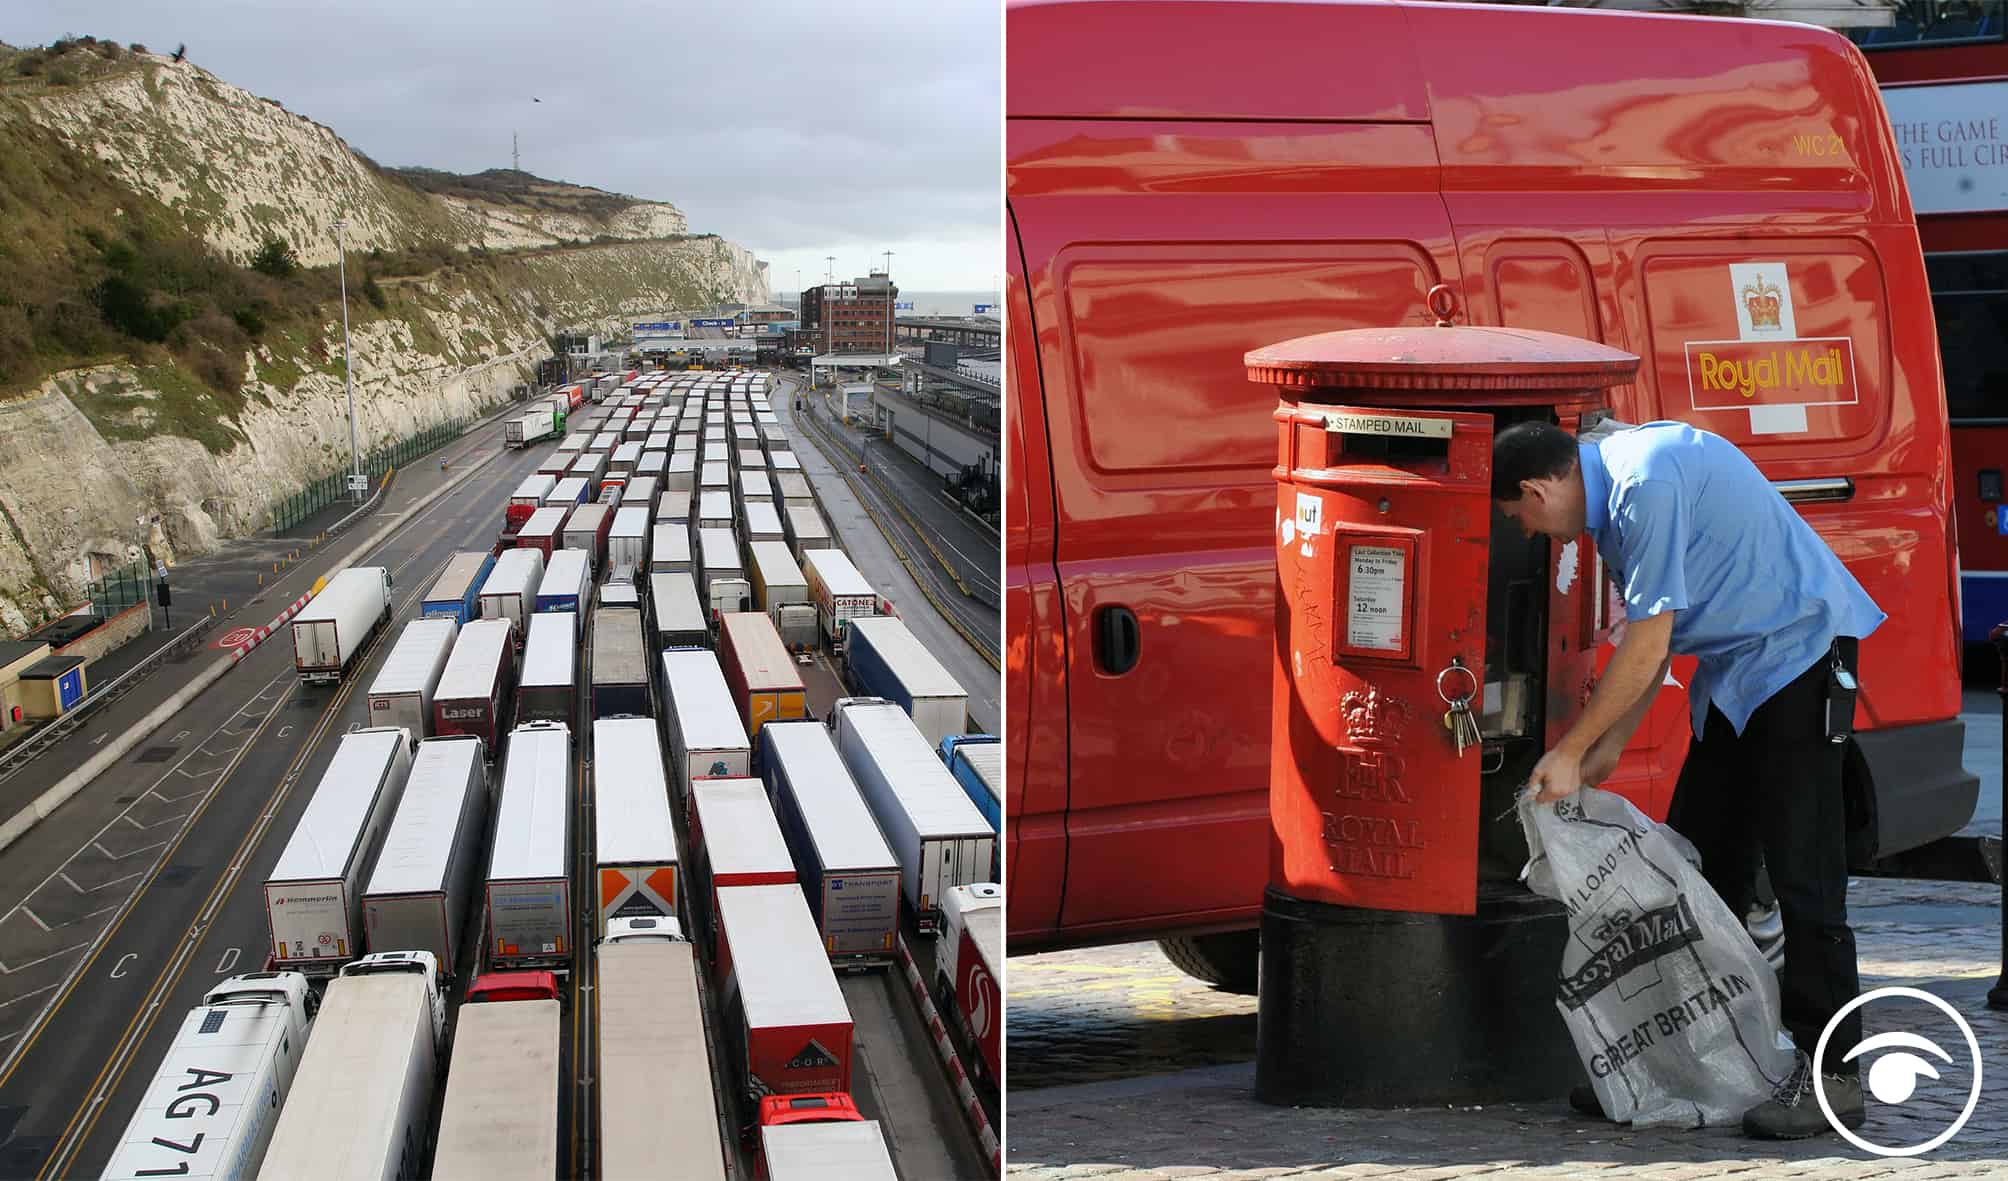 Royal Mail suspends deliveries to mainland Europe as retail chief warns border must reopen by Wednesday